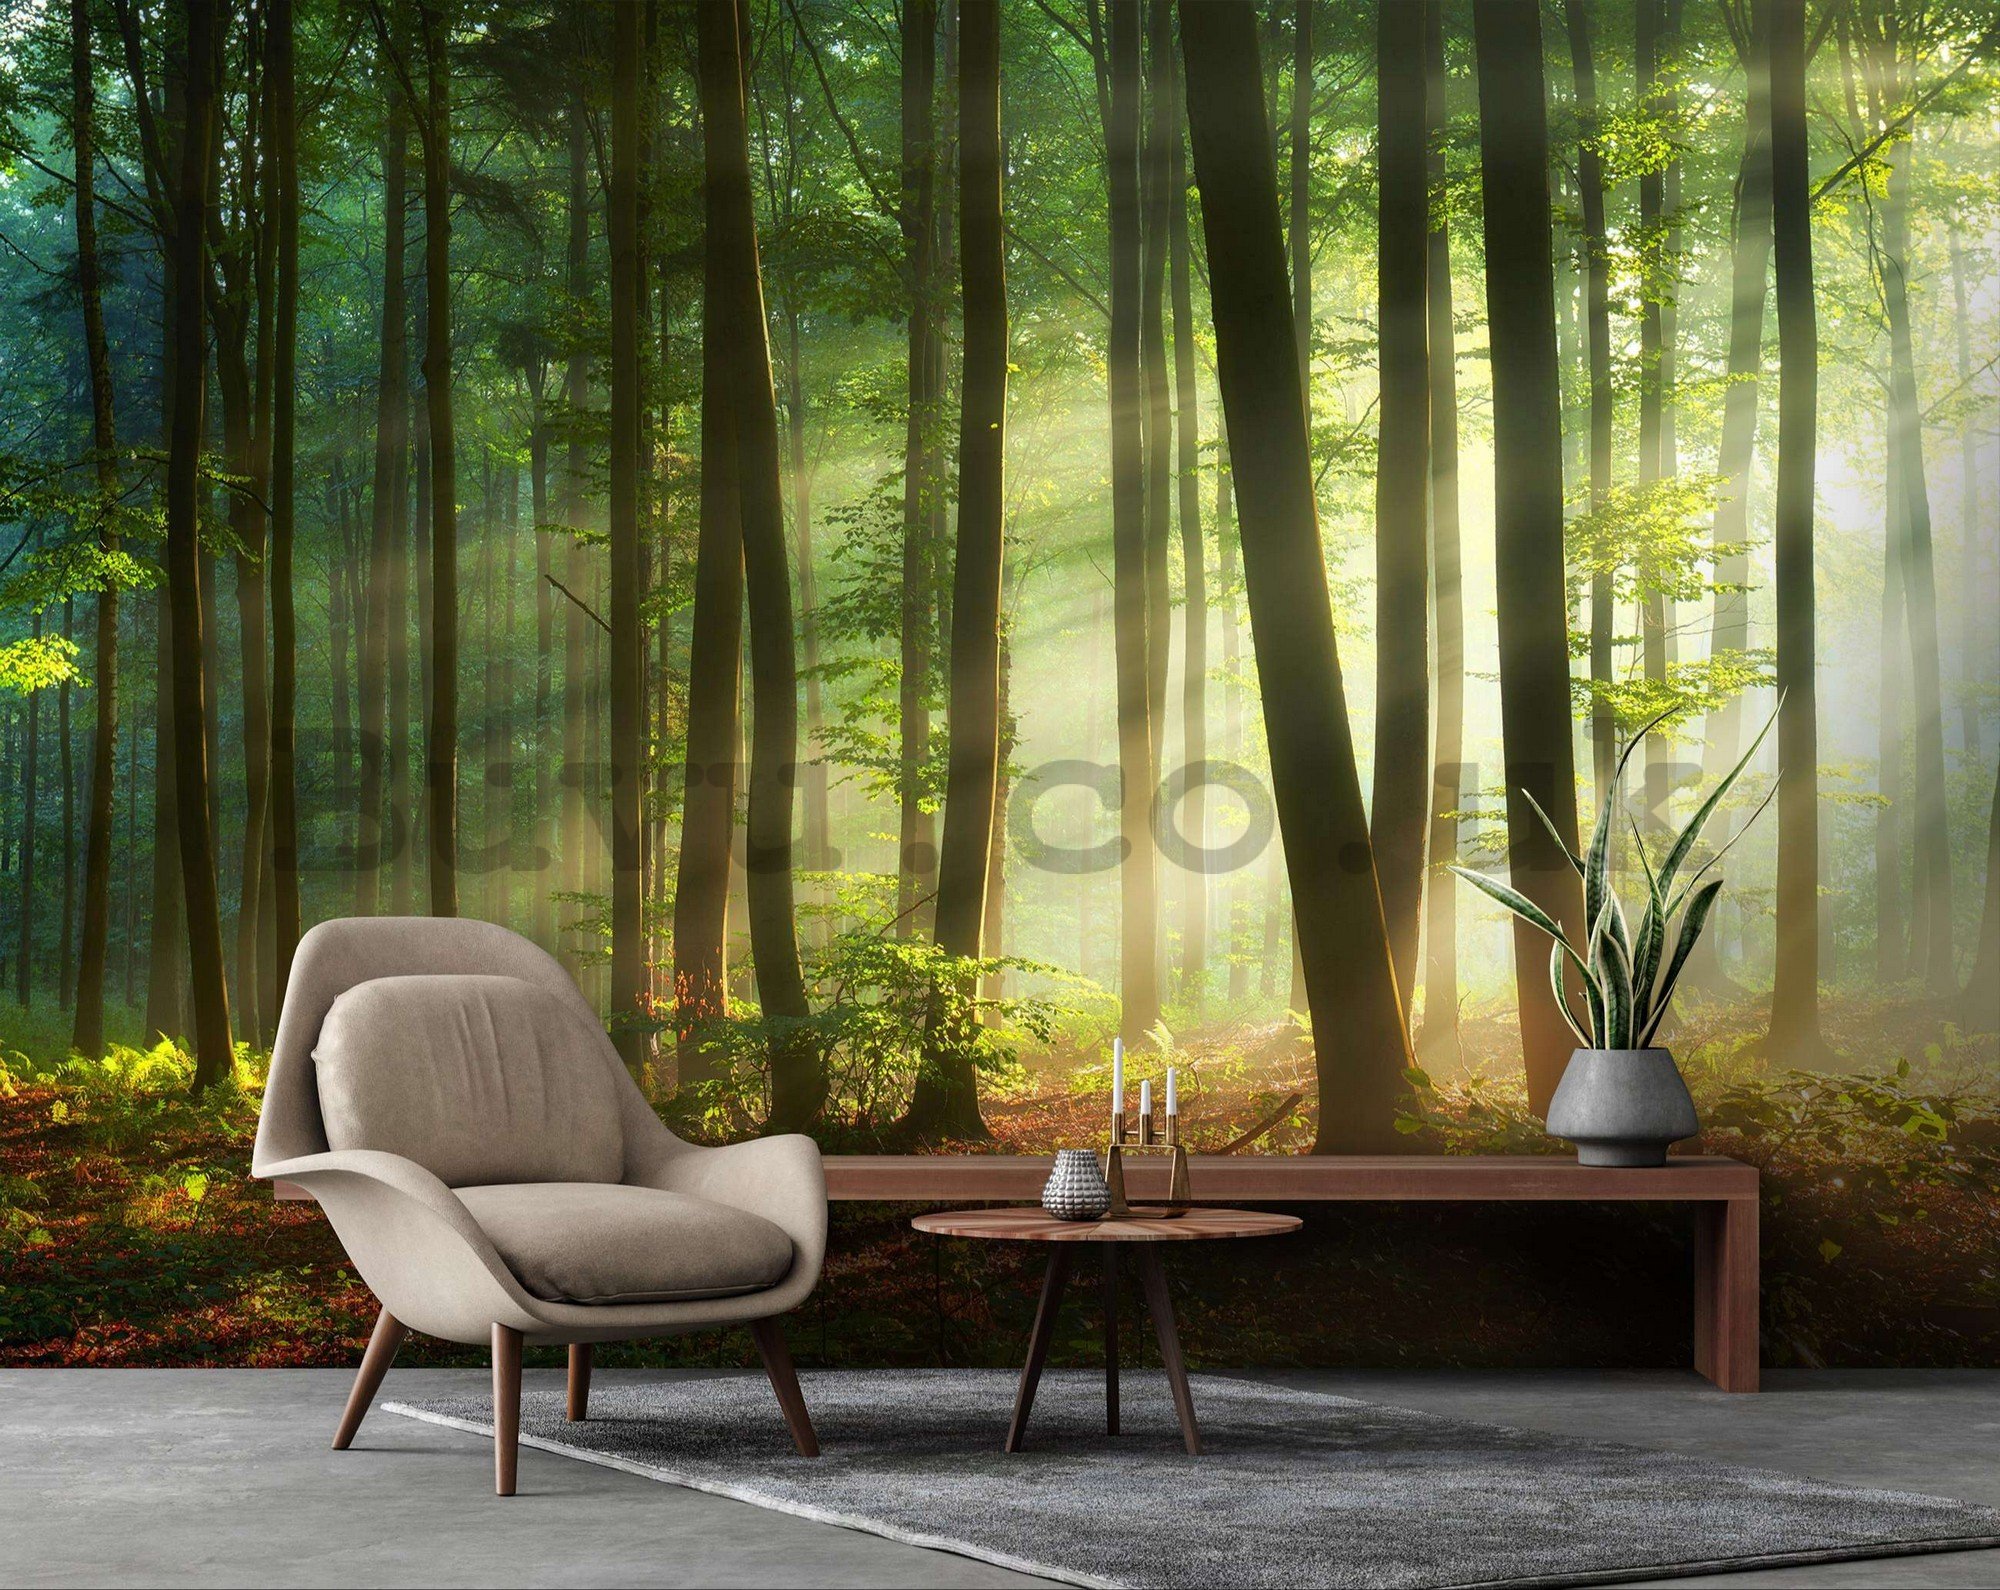 Wall mural vlies: Sunrise in the forest - 152,5x104 cm